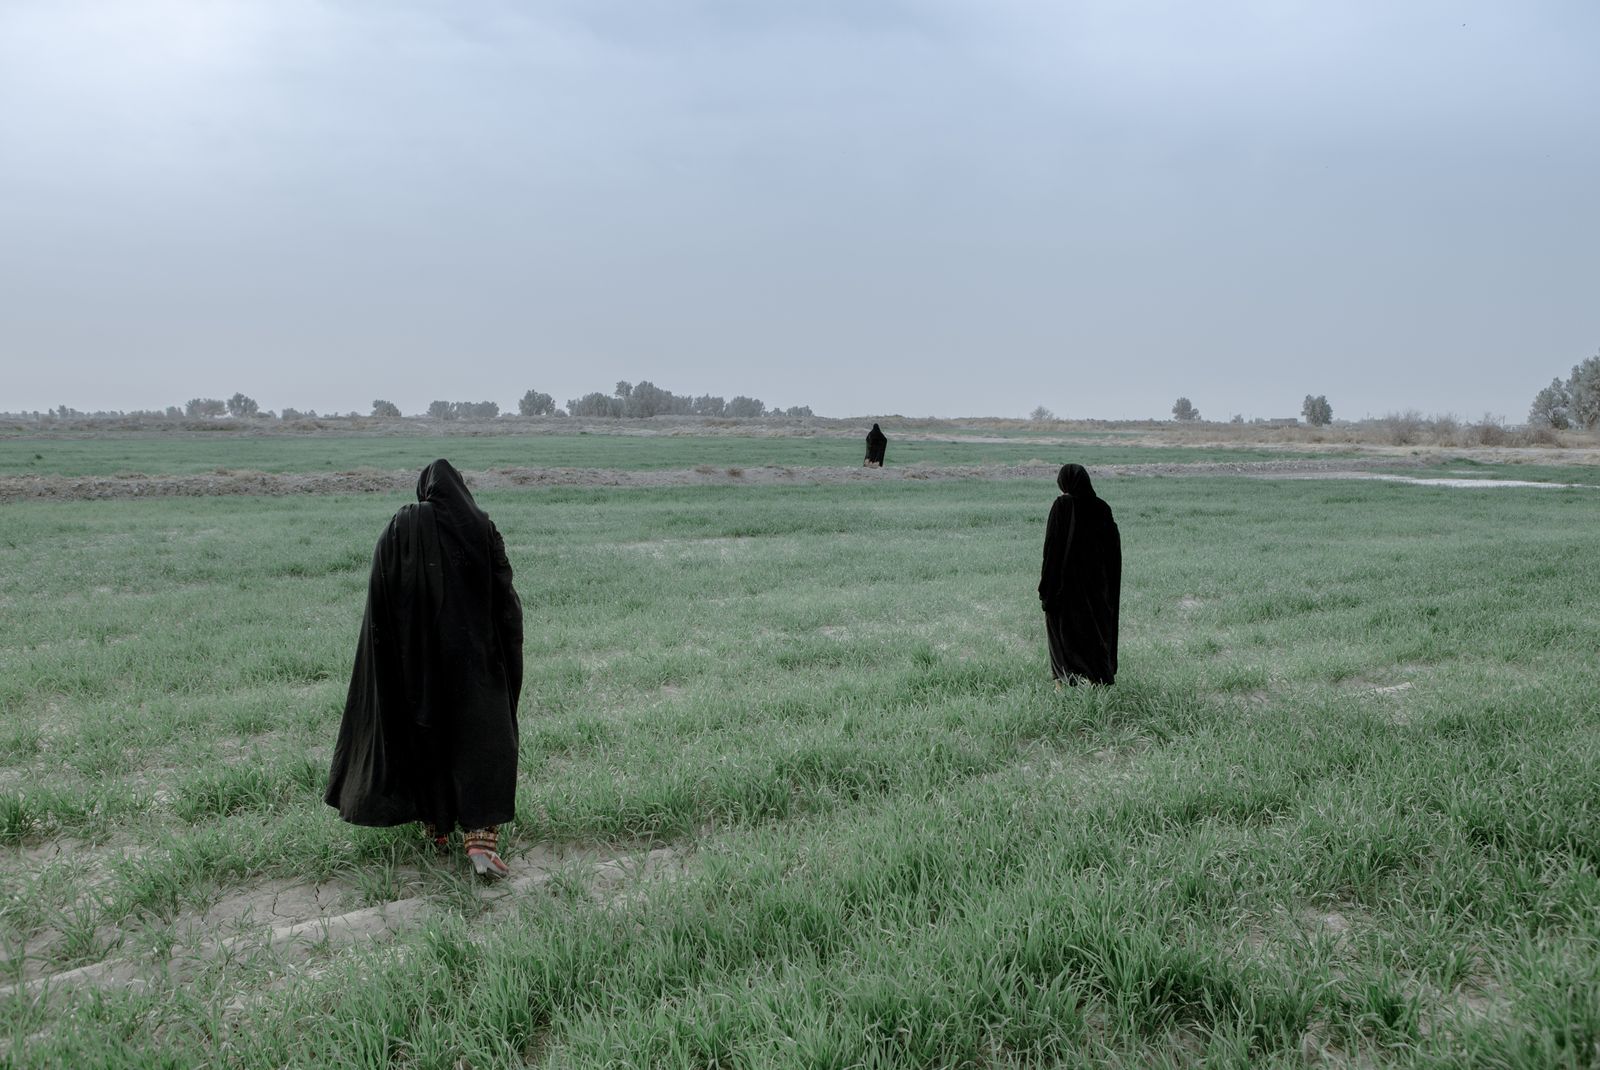 © Solmaz Daryani - Image from the In The Desert of Iran’s Wetlands photography project